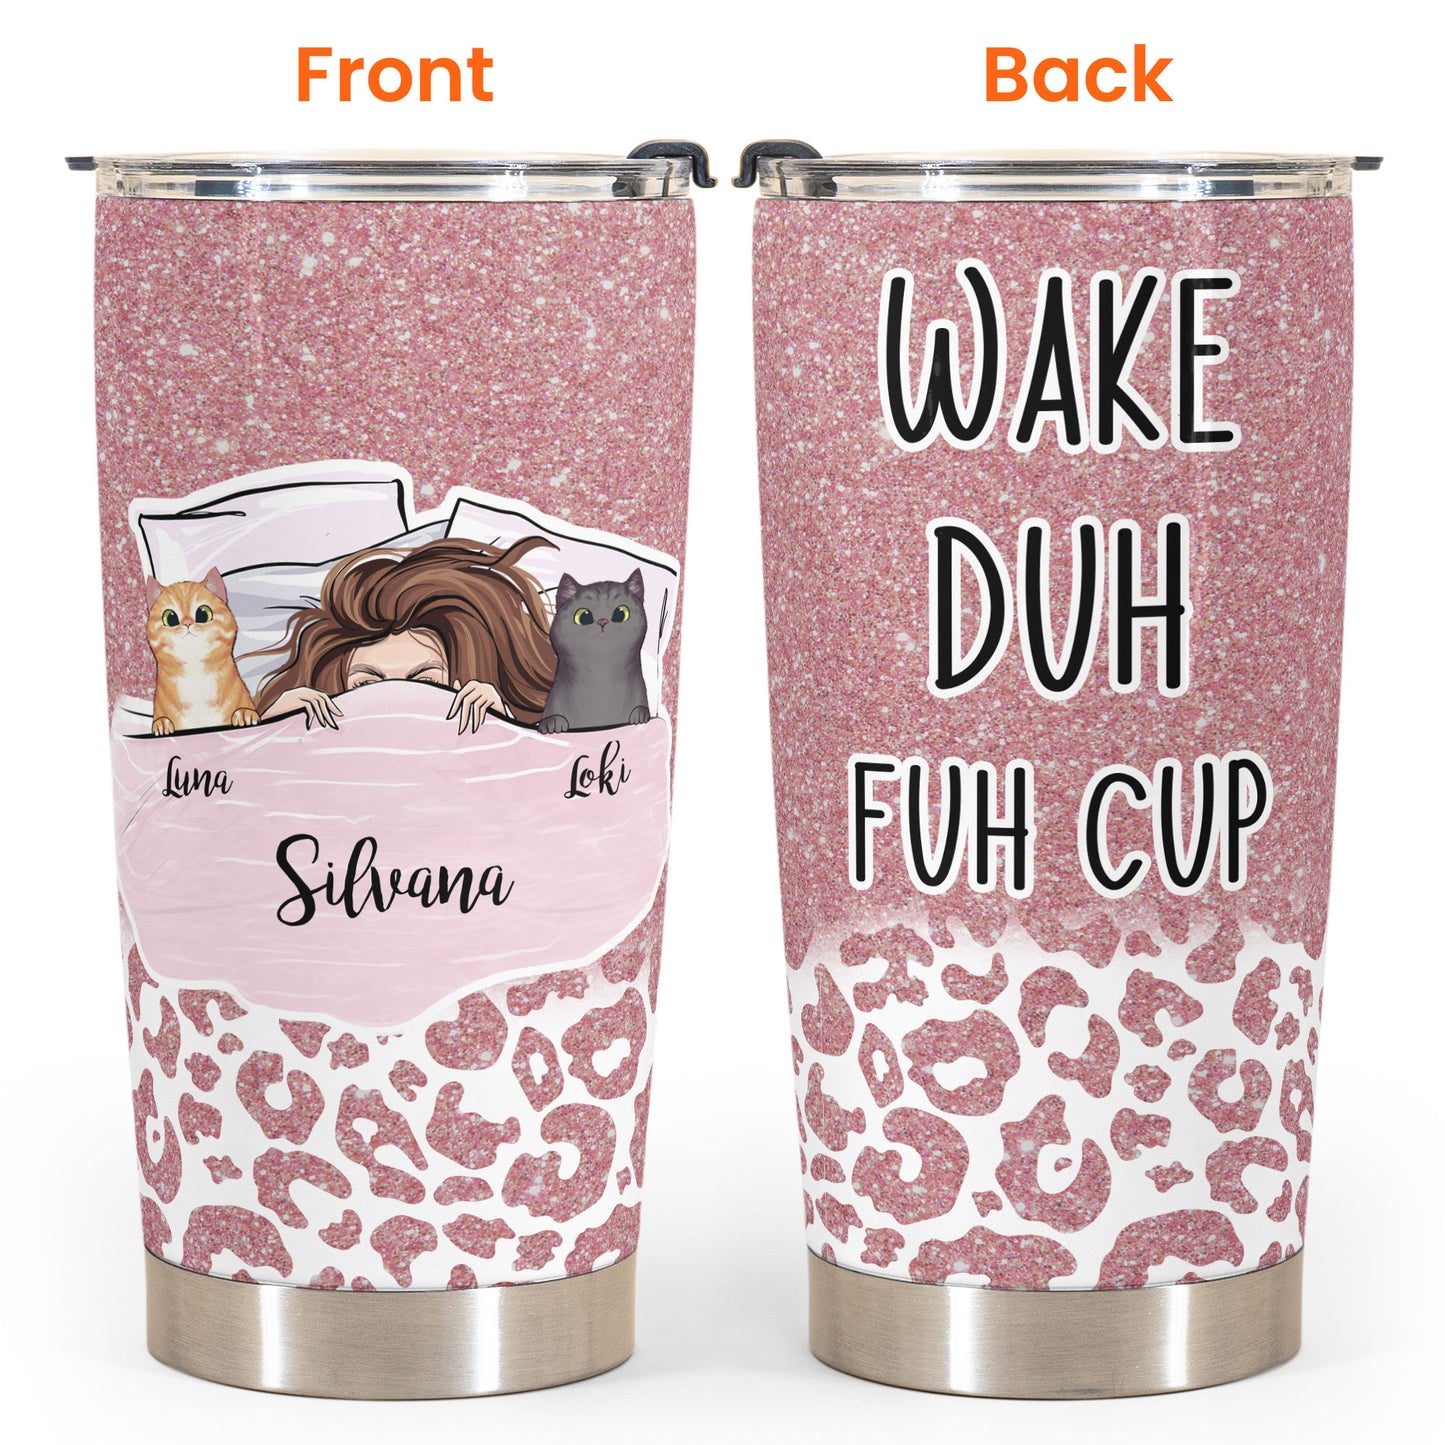 Wake Duh Fuh Cup - Personalized Tumbler Cup - Gift For Cat Mom